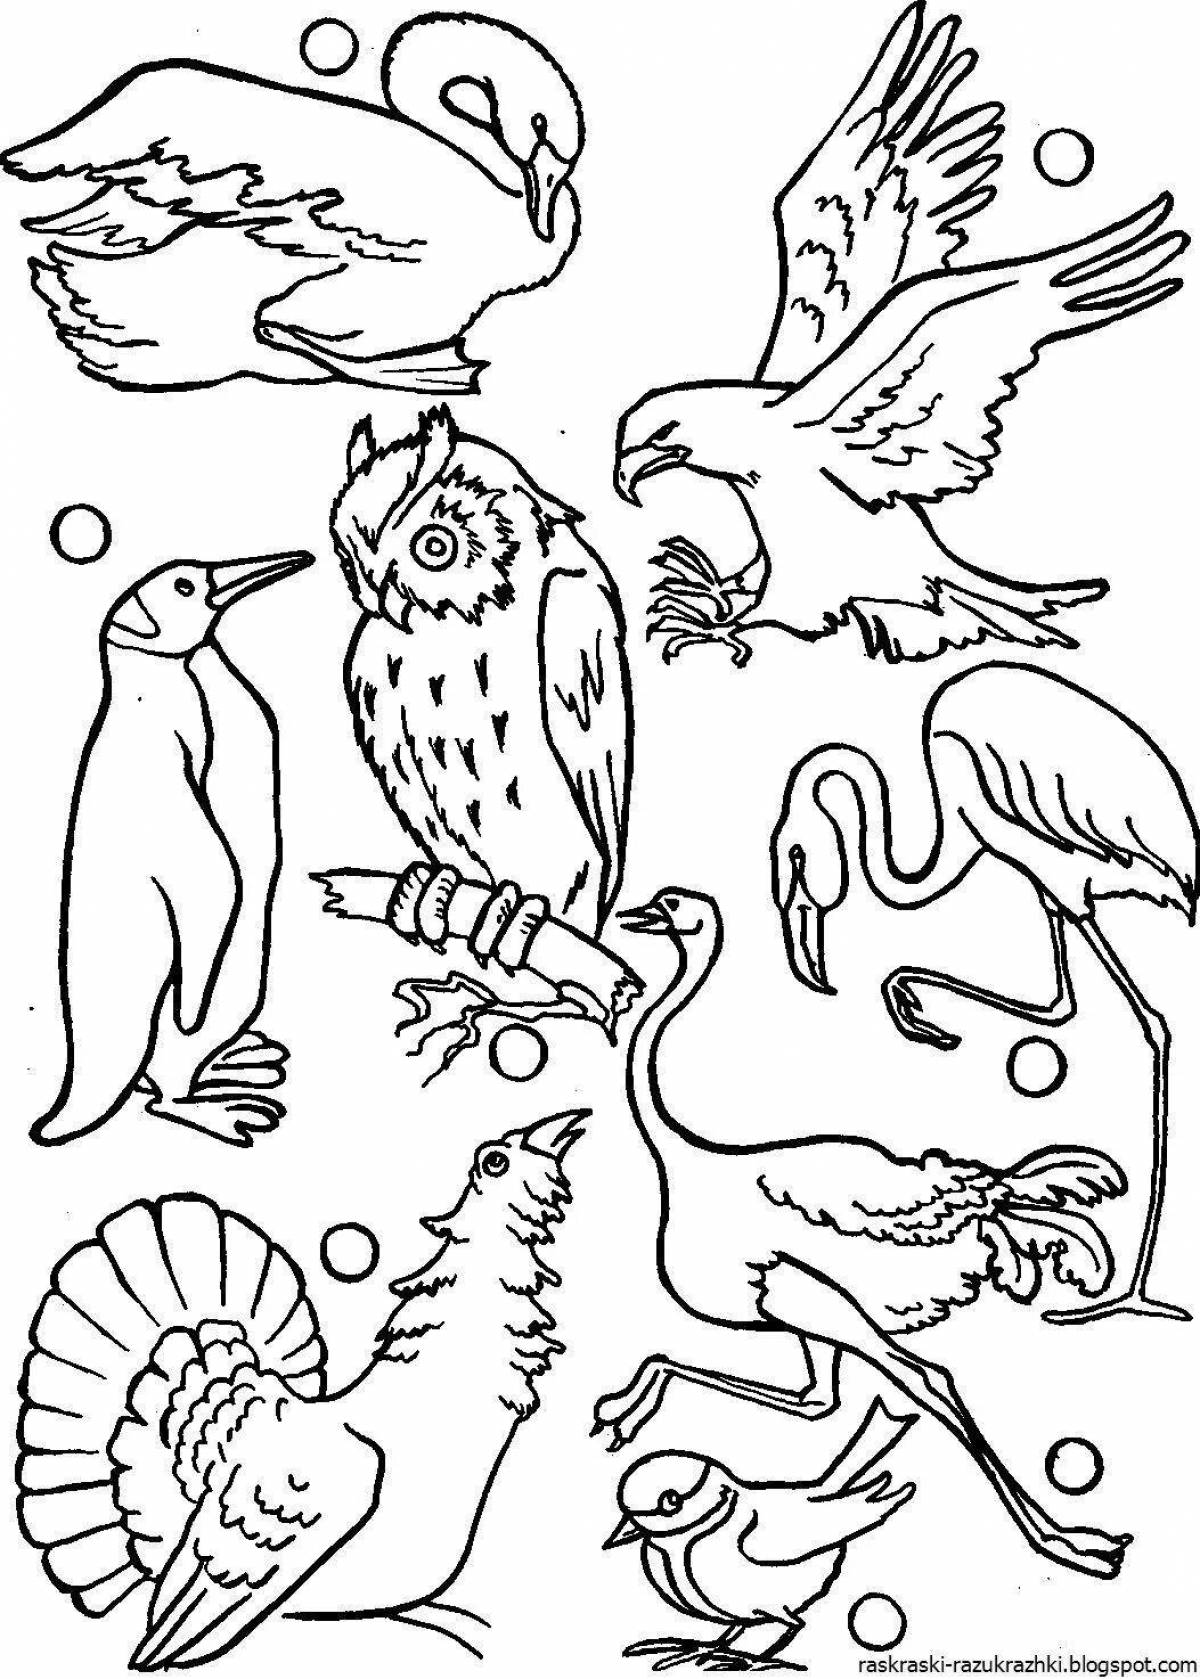 Wonderful bird coloring pages for kids 6-7 years old